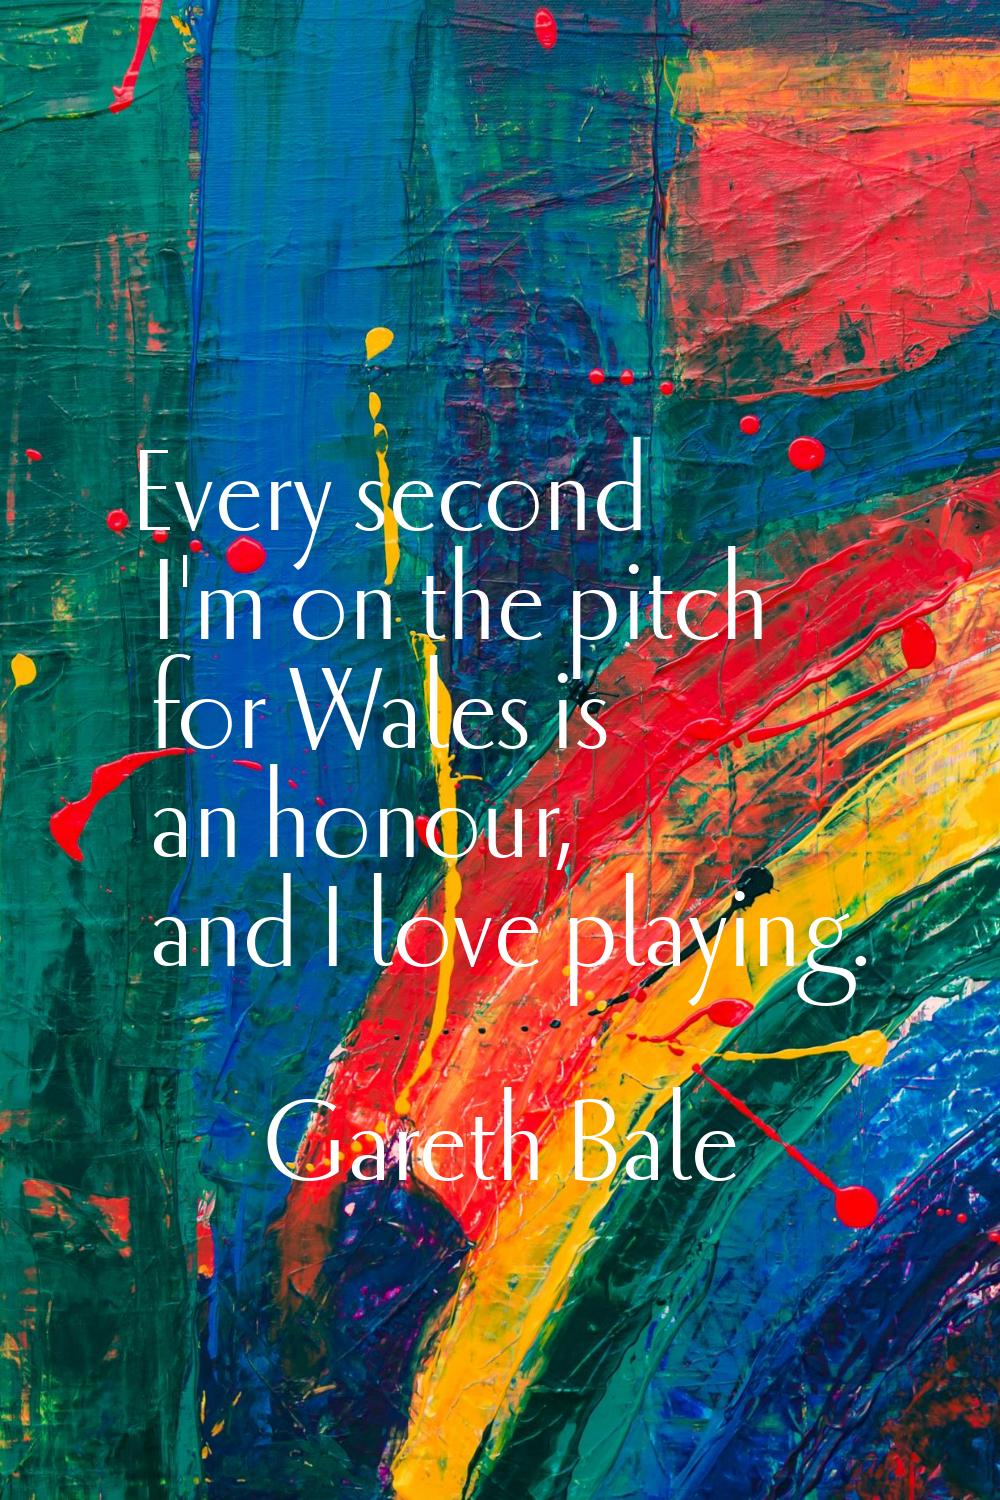 Every second I'm on the pitch for Wales is an honour, and I love playing.